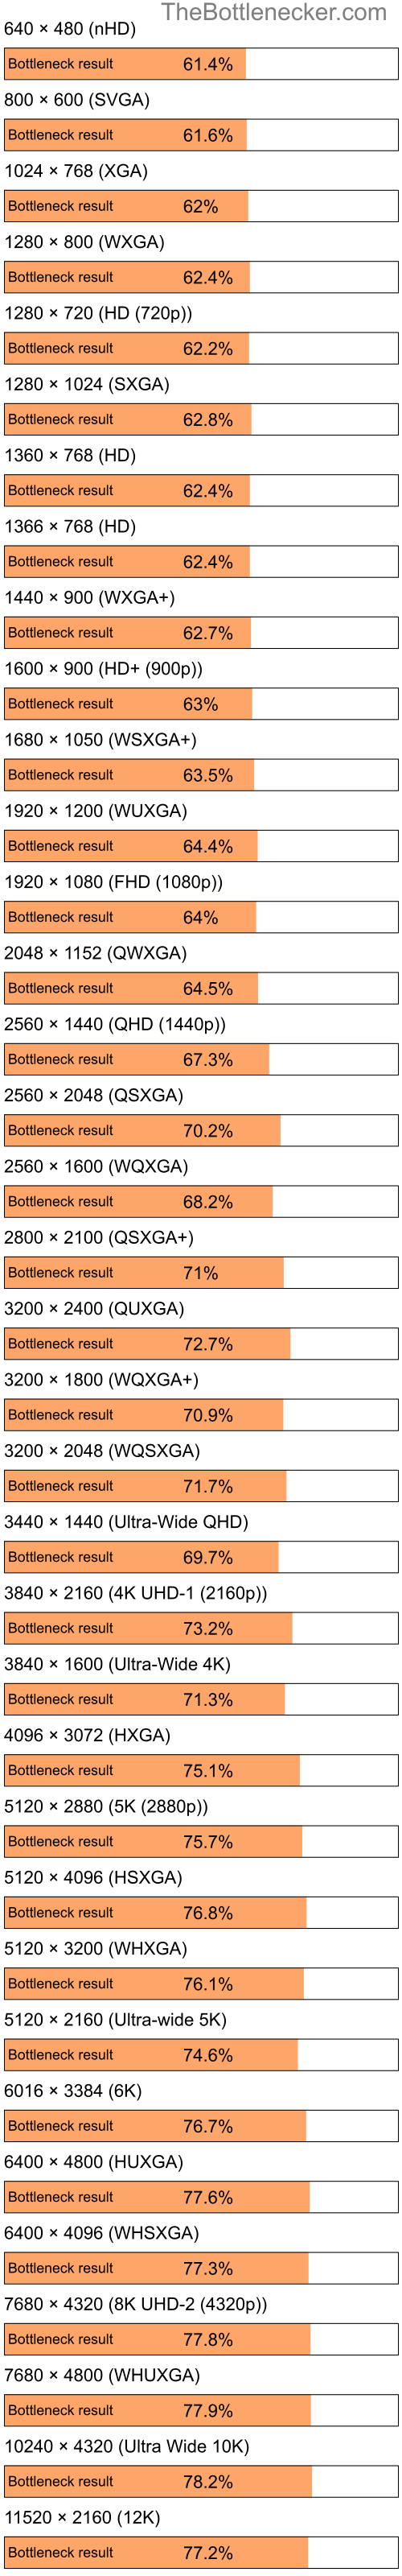 Bottleneck results by resolution for Intel Atom Z520 and AMD Radeon HD 4200 in7 Days to Die